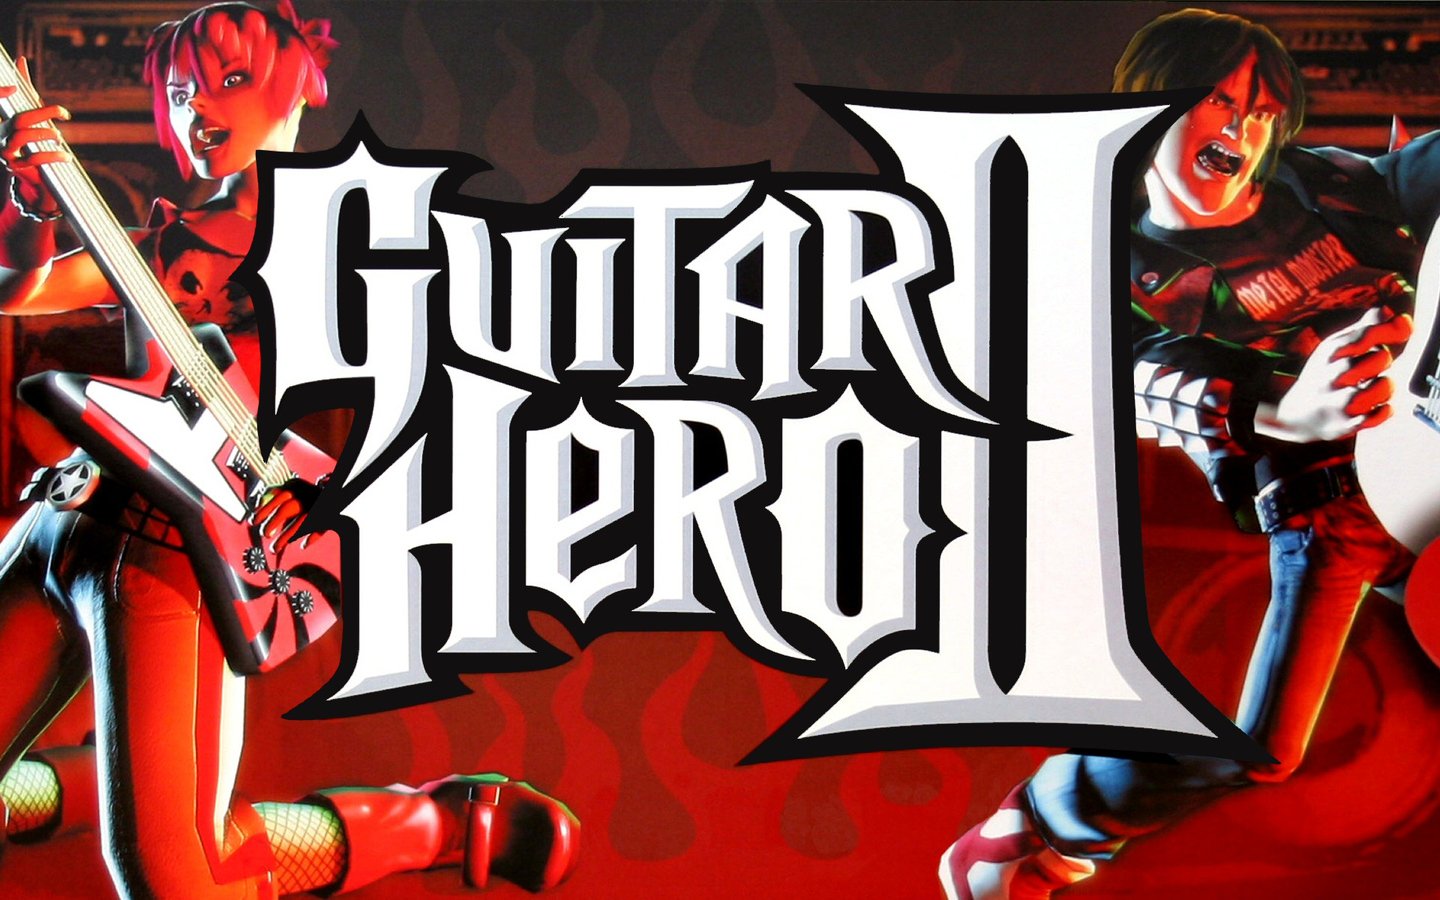 Guitar Hero 2 - PlayStation 2 (Game only)